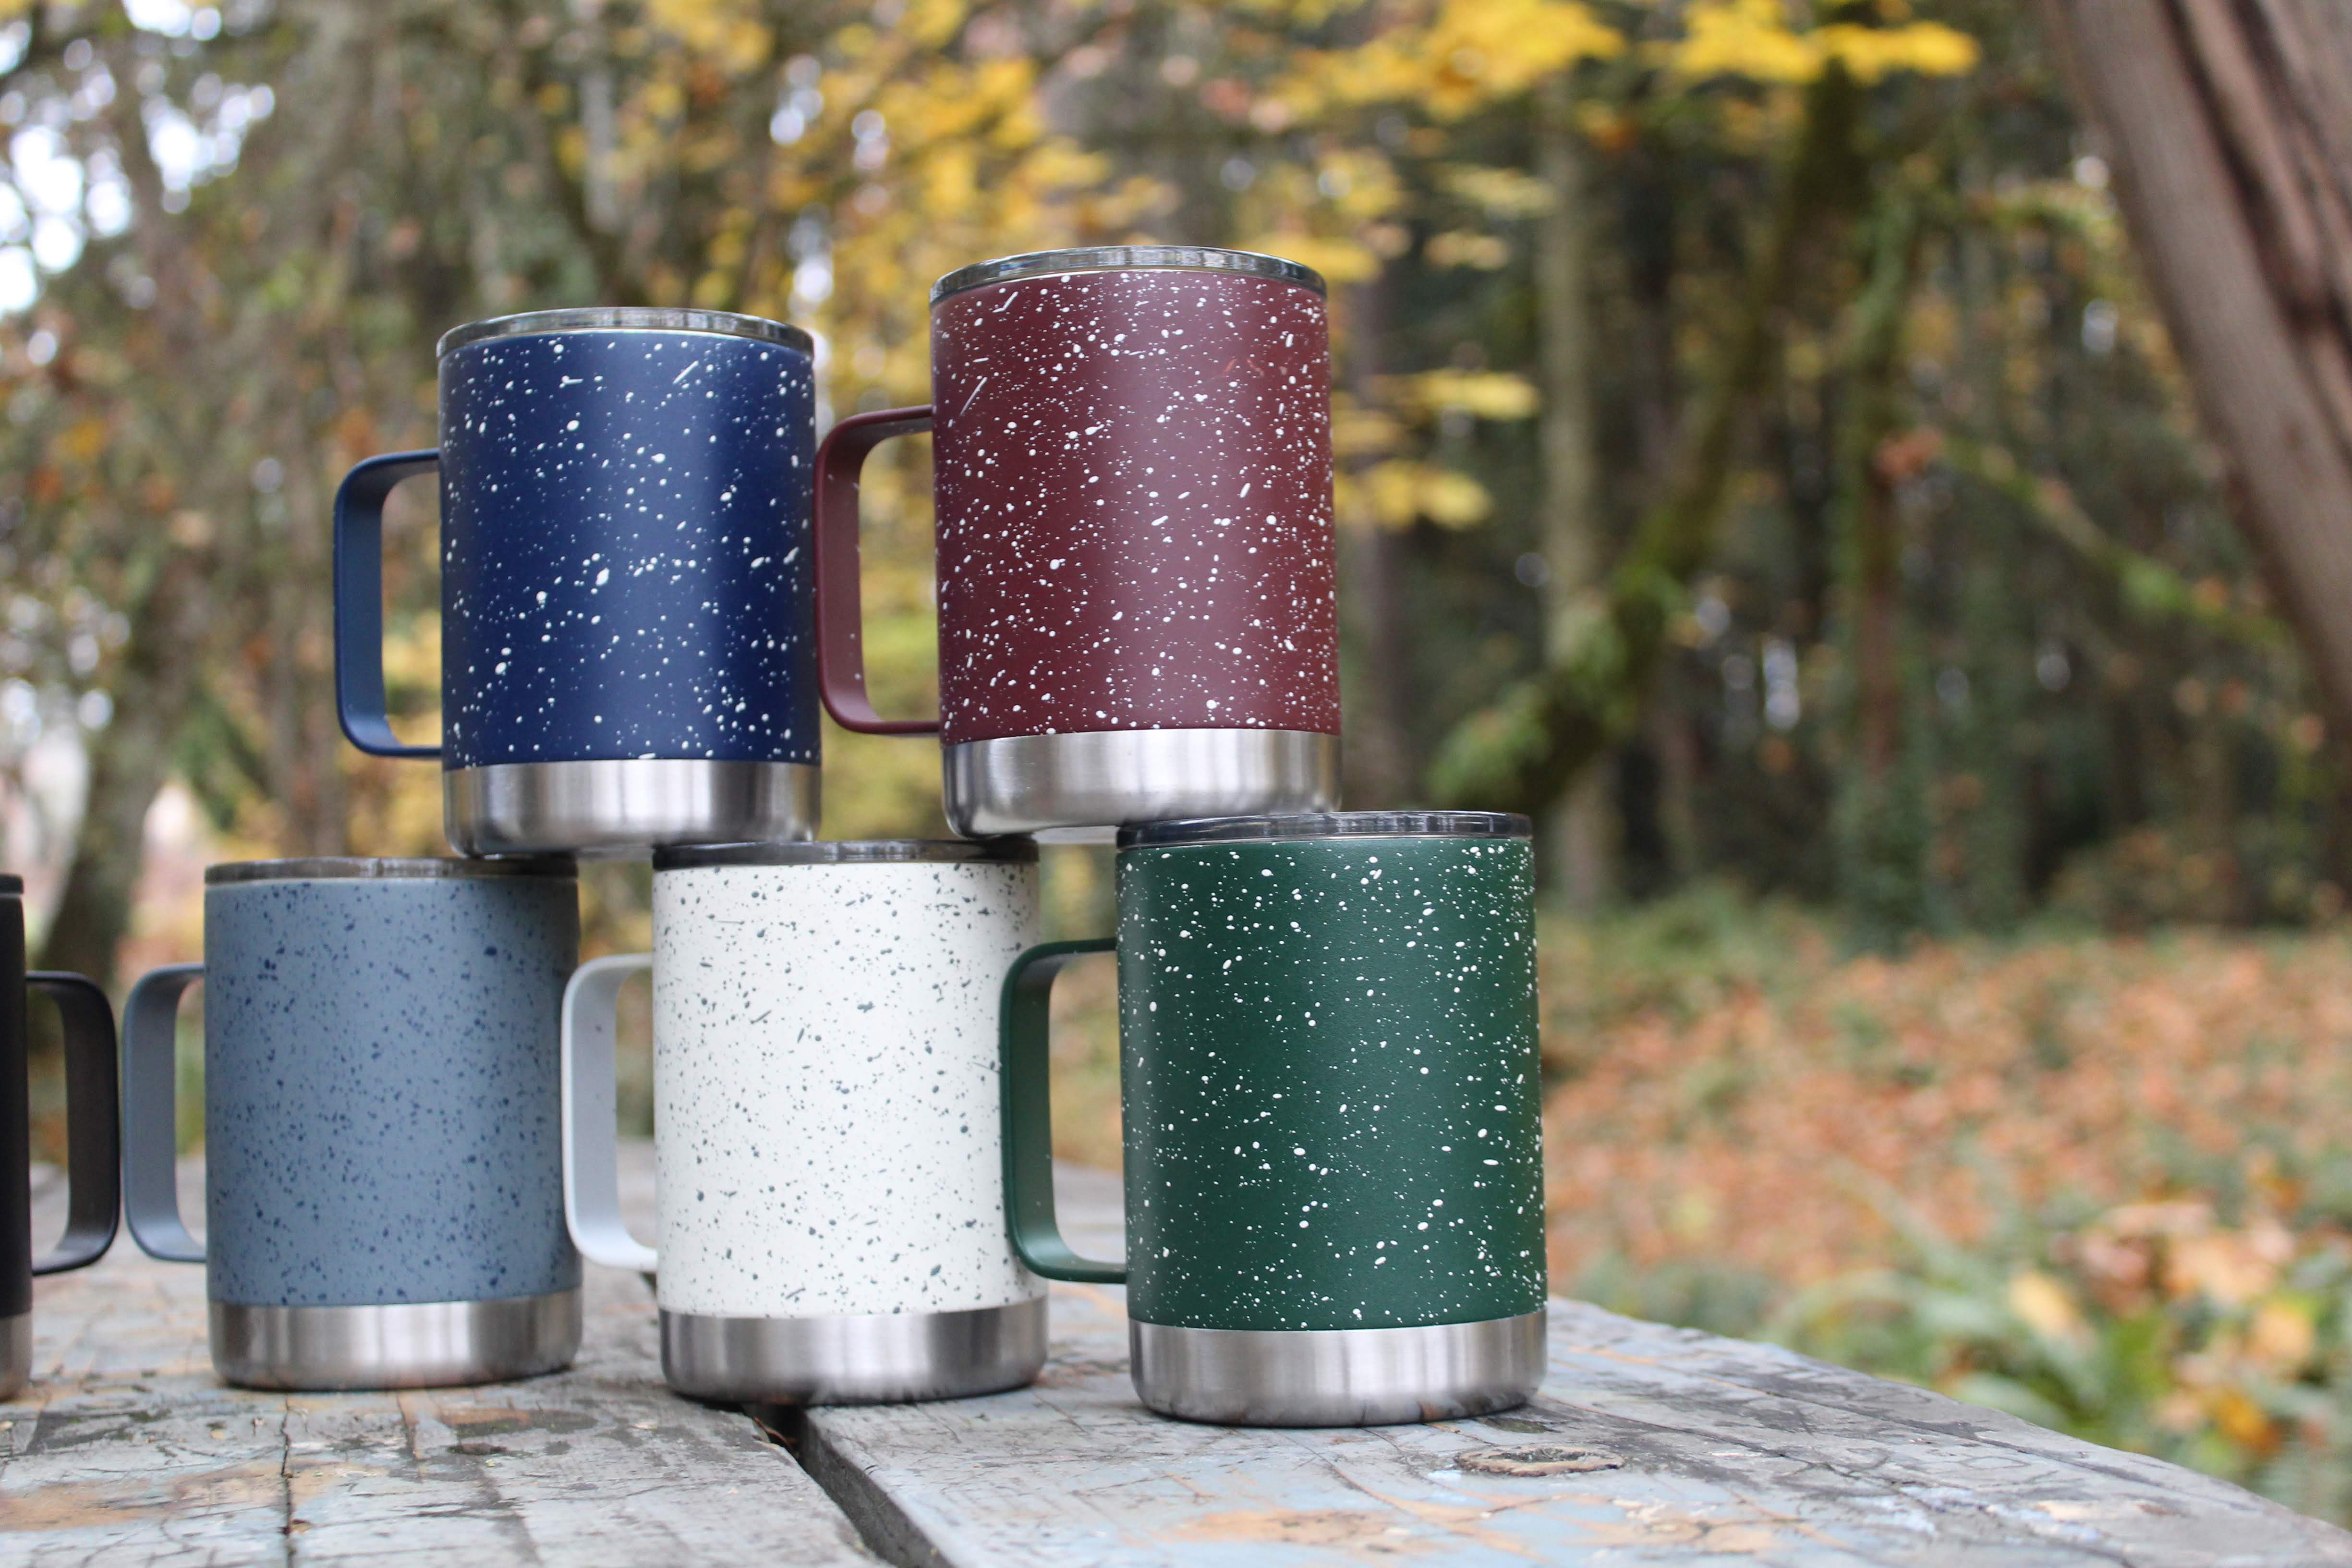 Ello Campy Stainless Steel Travel Mug Review: Not The Best